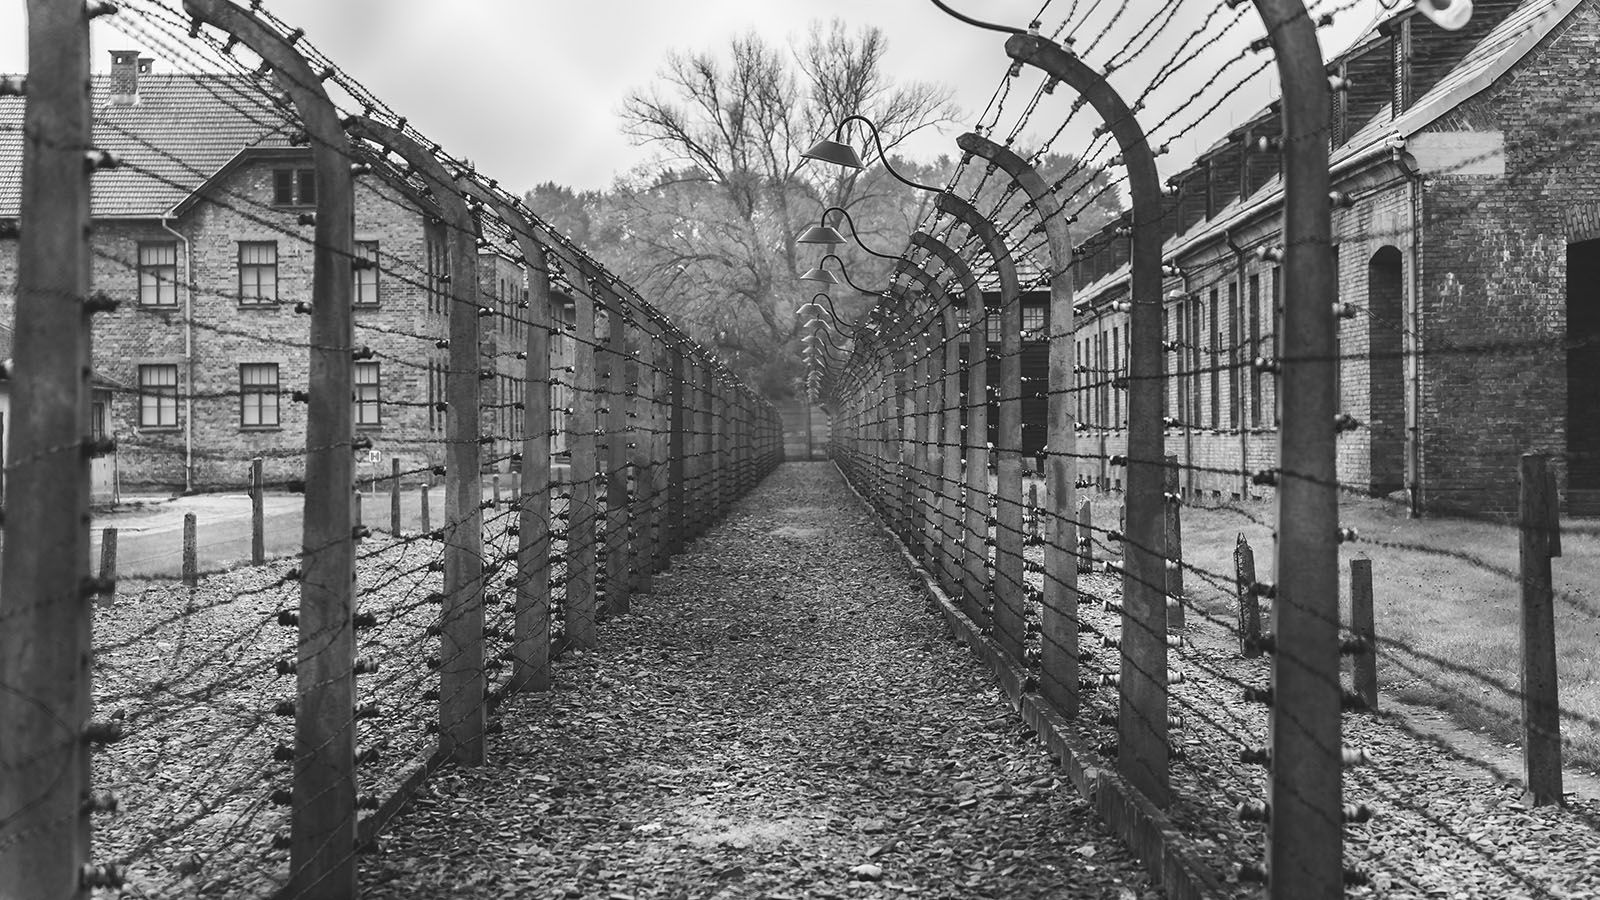 Concentration camp stock image